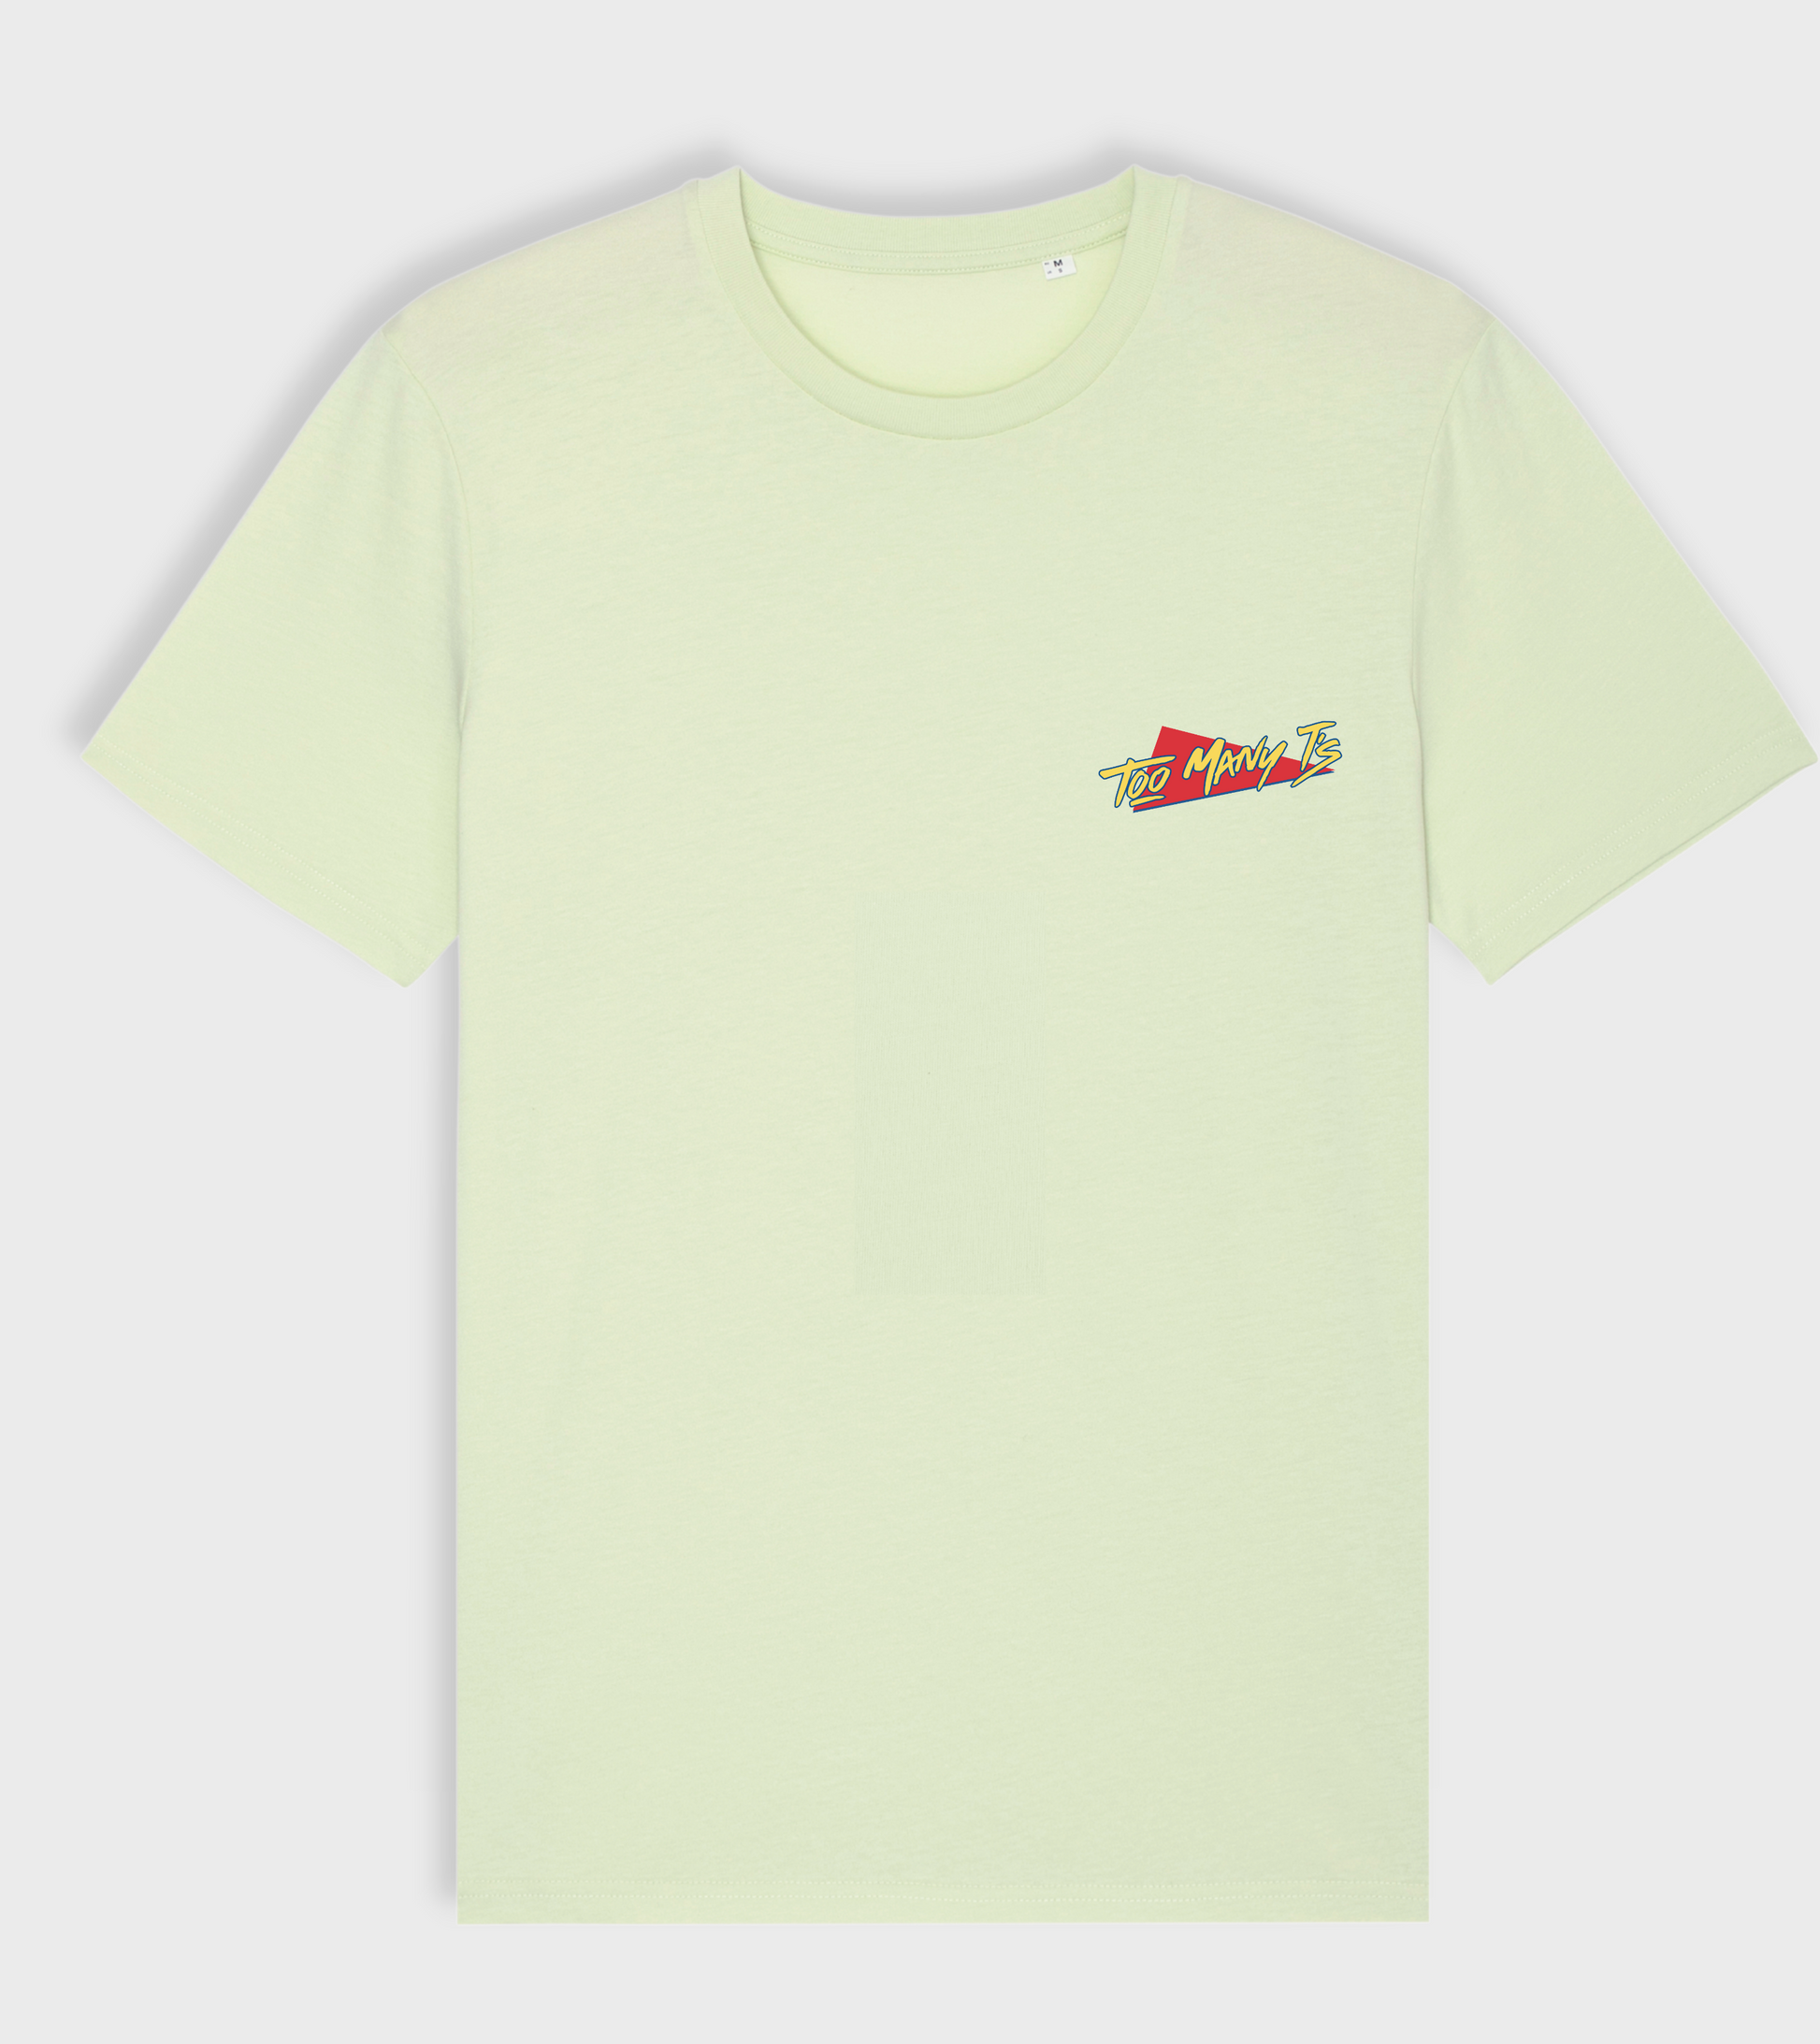 Mint green organic t-shirt with TOO MANY T'S original design.